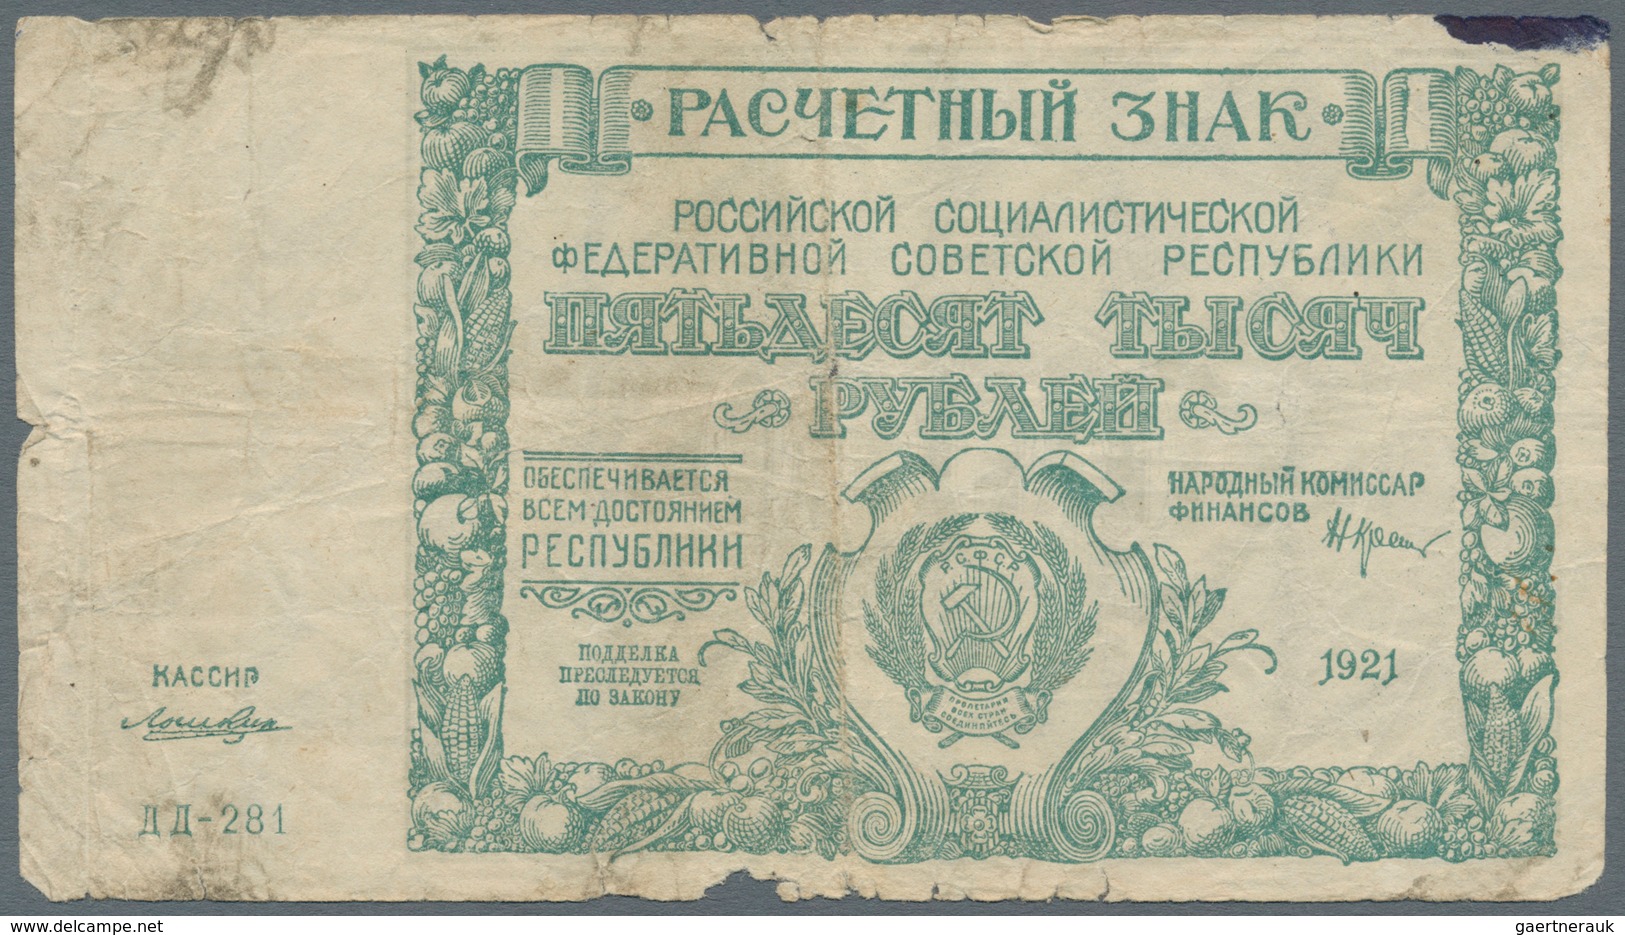 Russia / Russland: Very interesting lot with 41 Banknotes State issues 1915 till 1947, comprising fo